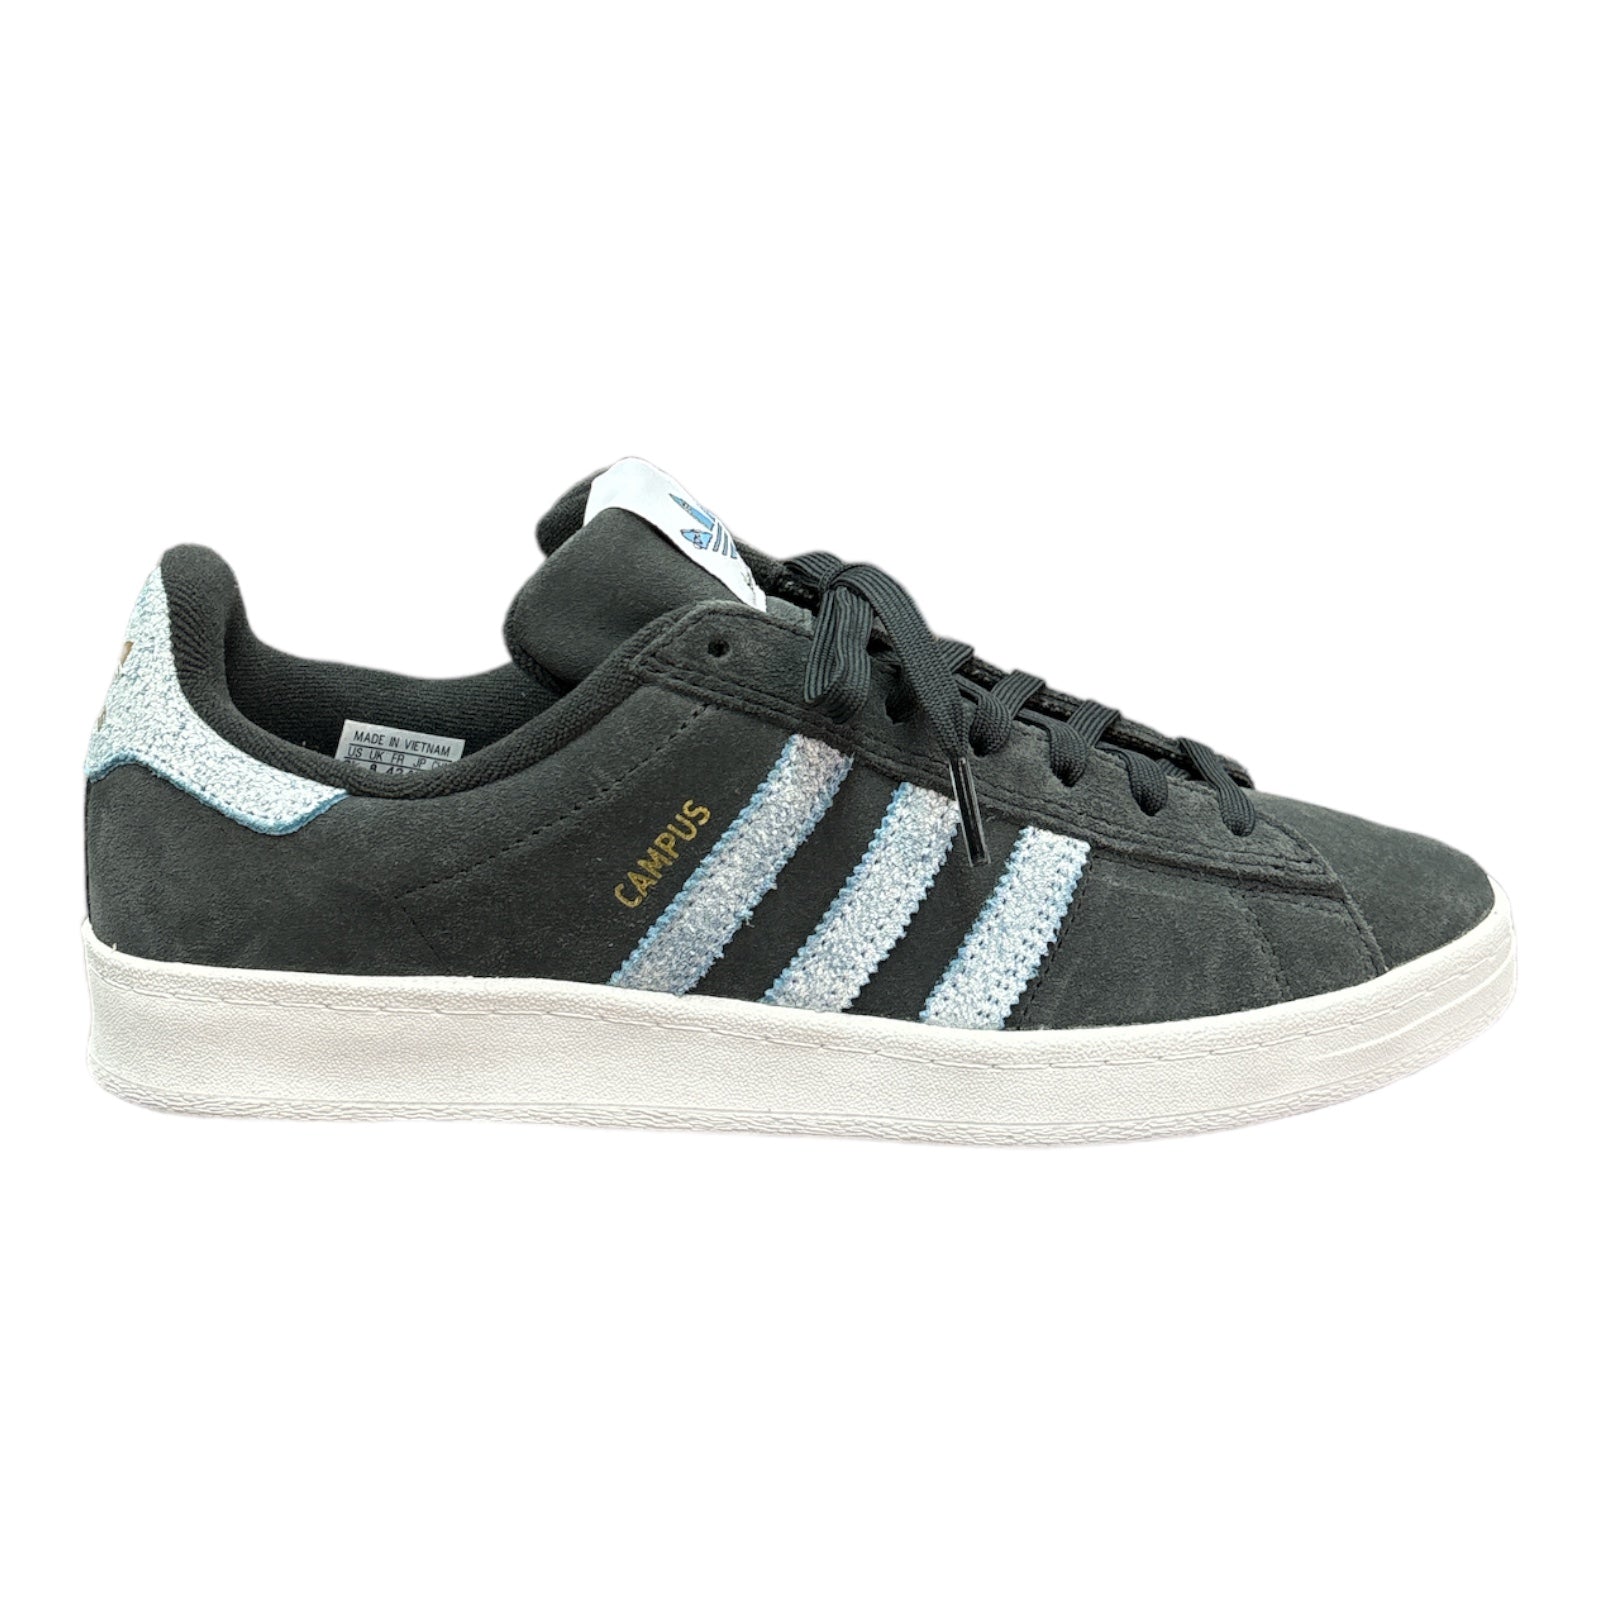 Adidas Campus SHoe in Grey Suede with Light Blue Stripes